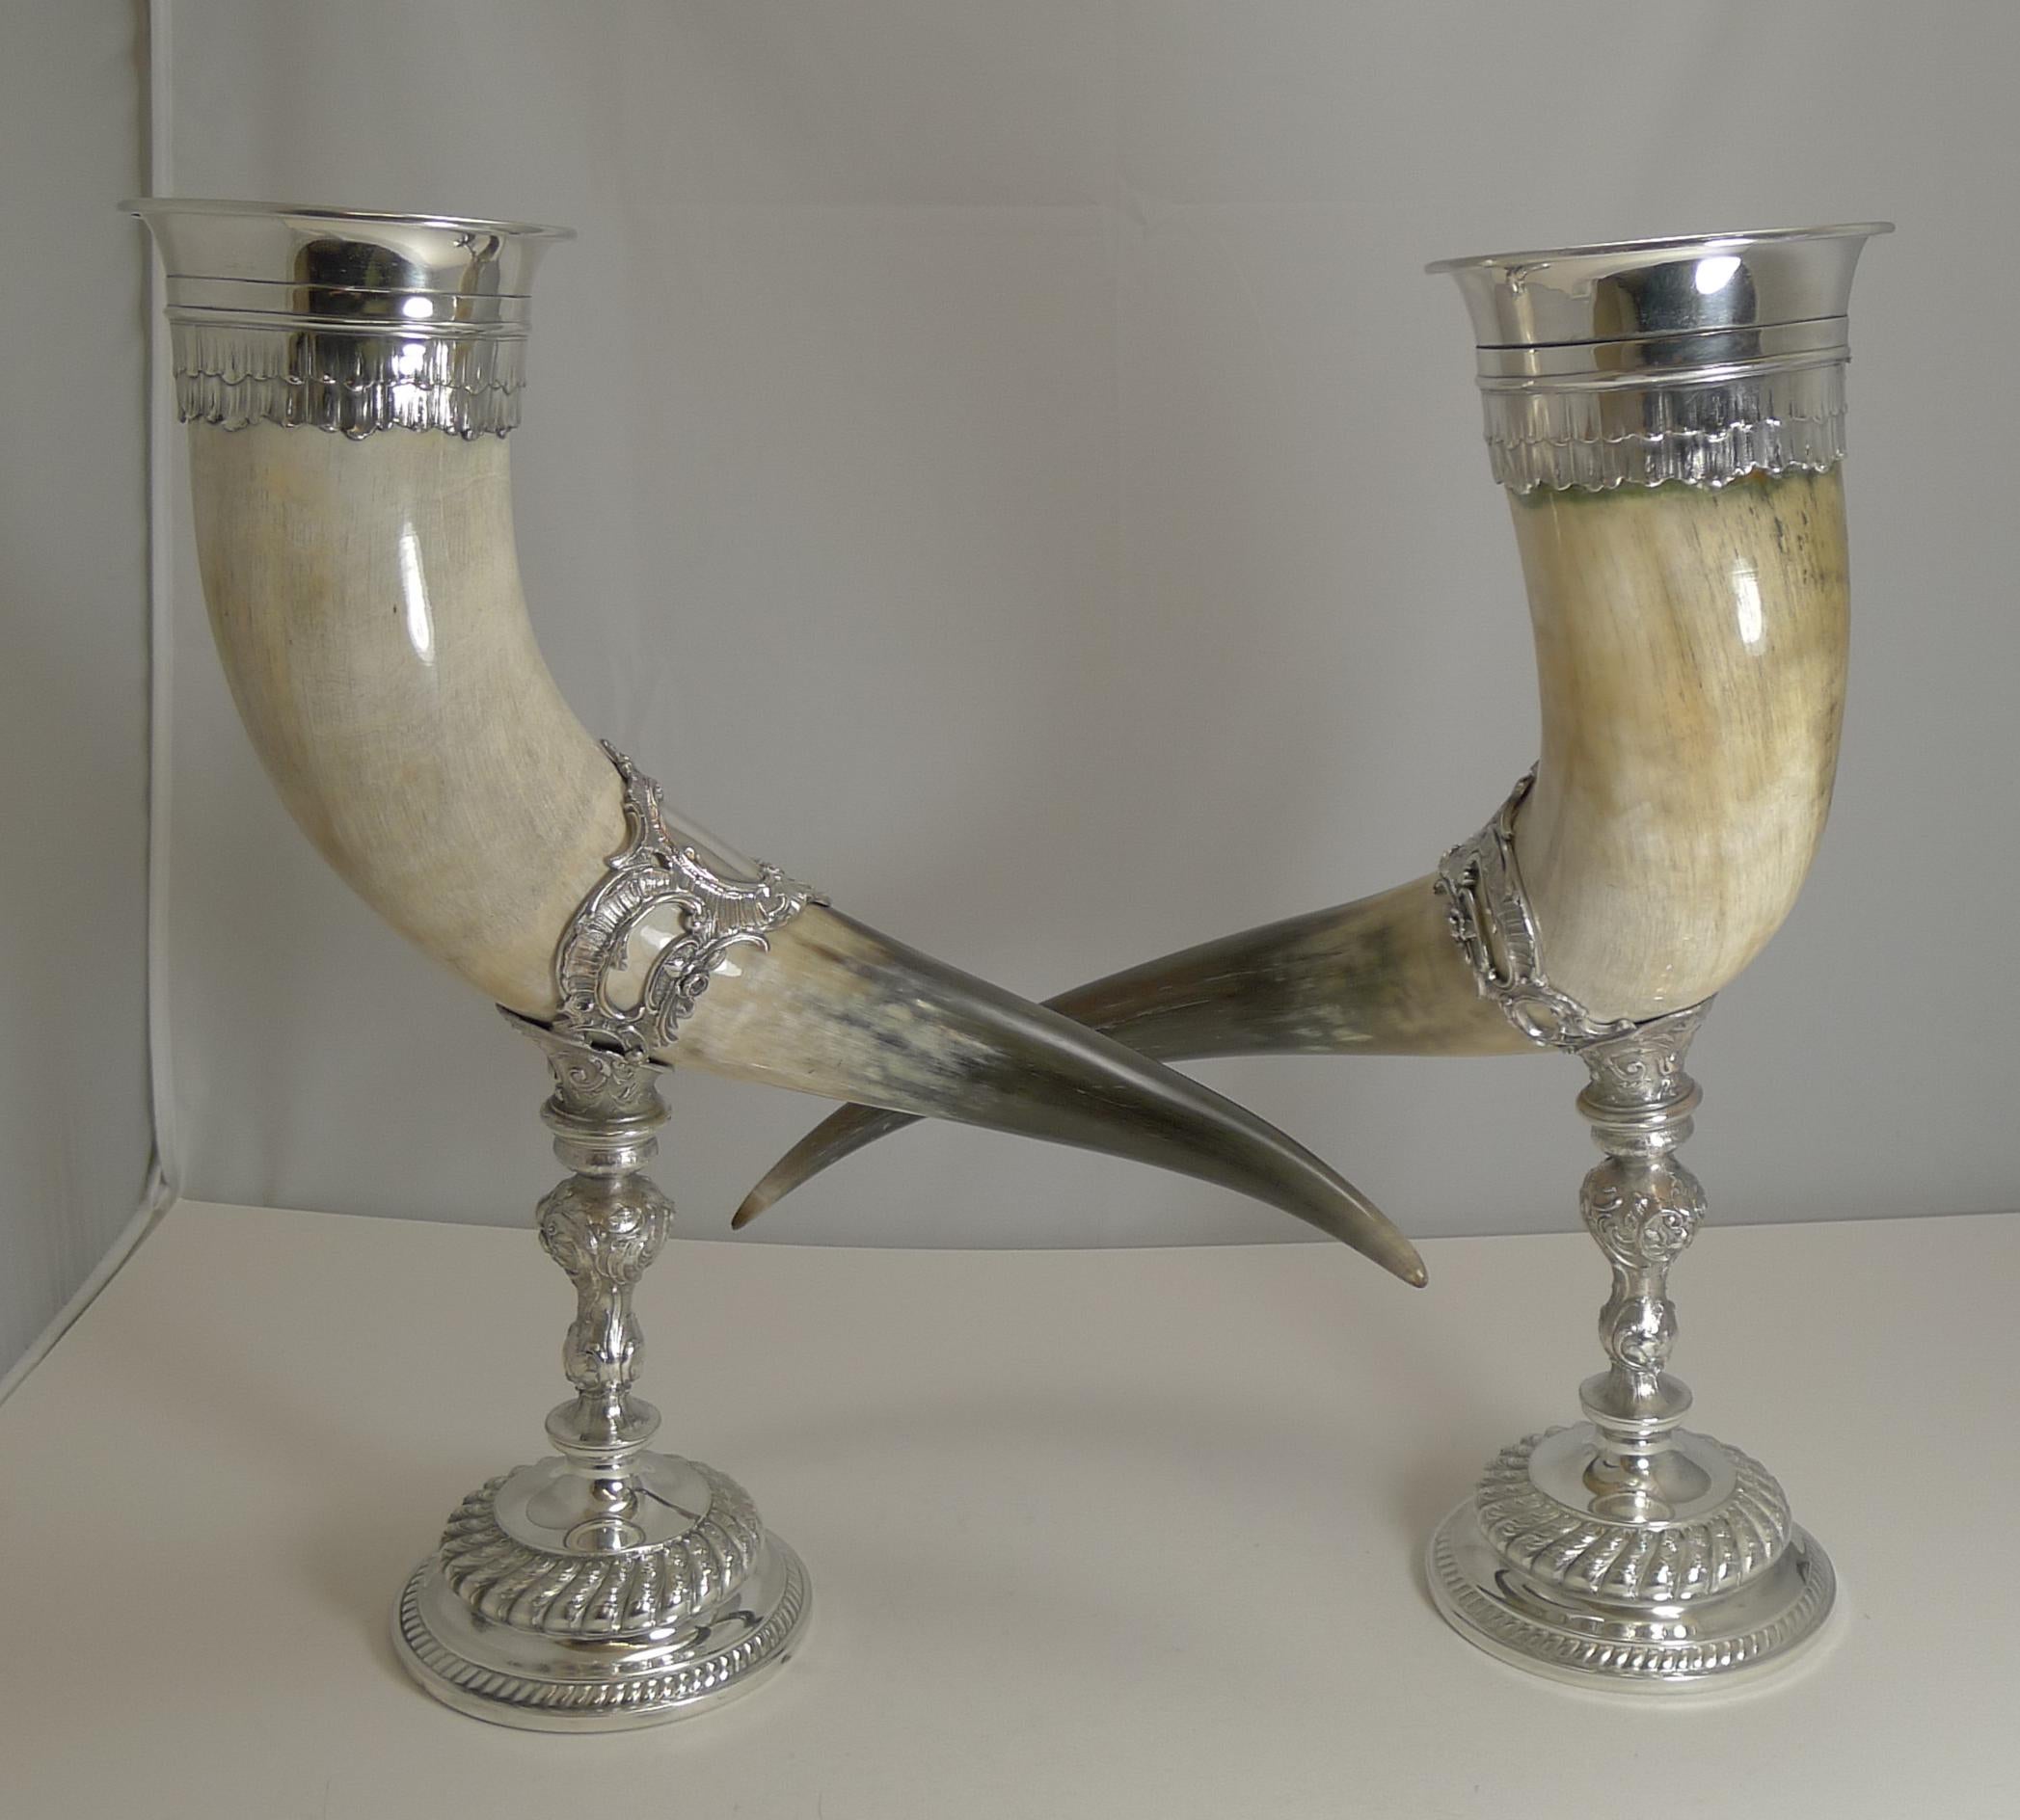 Edwardian Outstanding Large Pair of Horn and Silver Plate Cornucopia, circa 1900